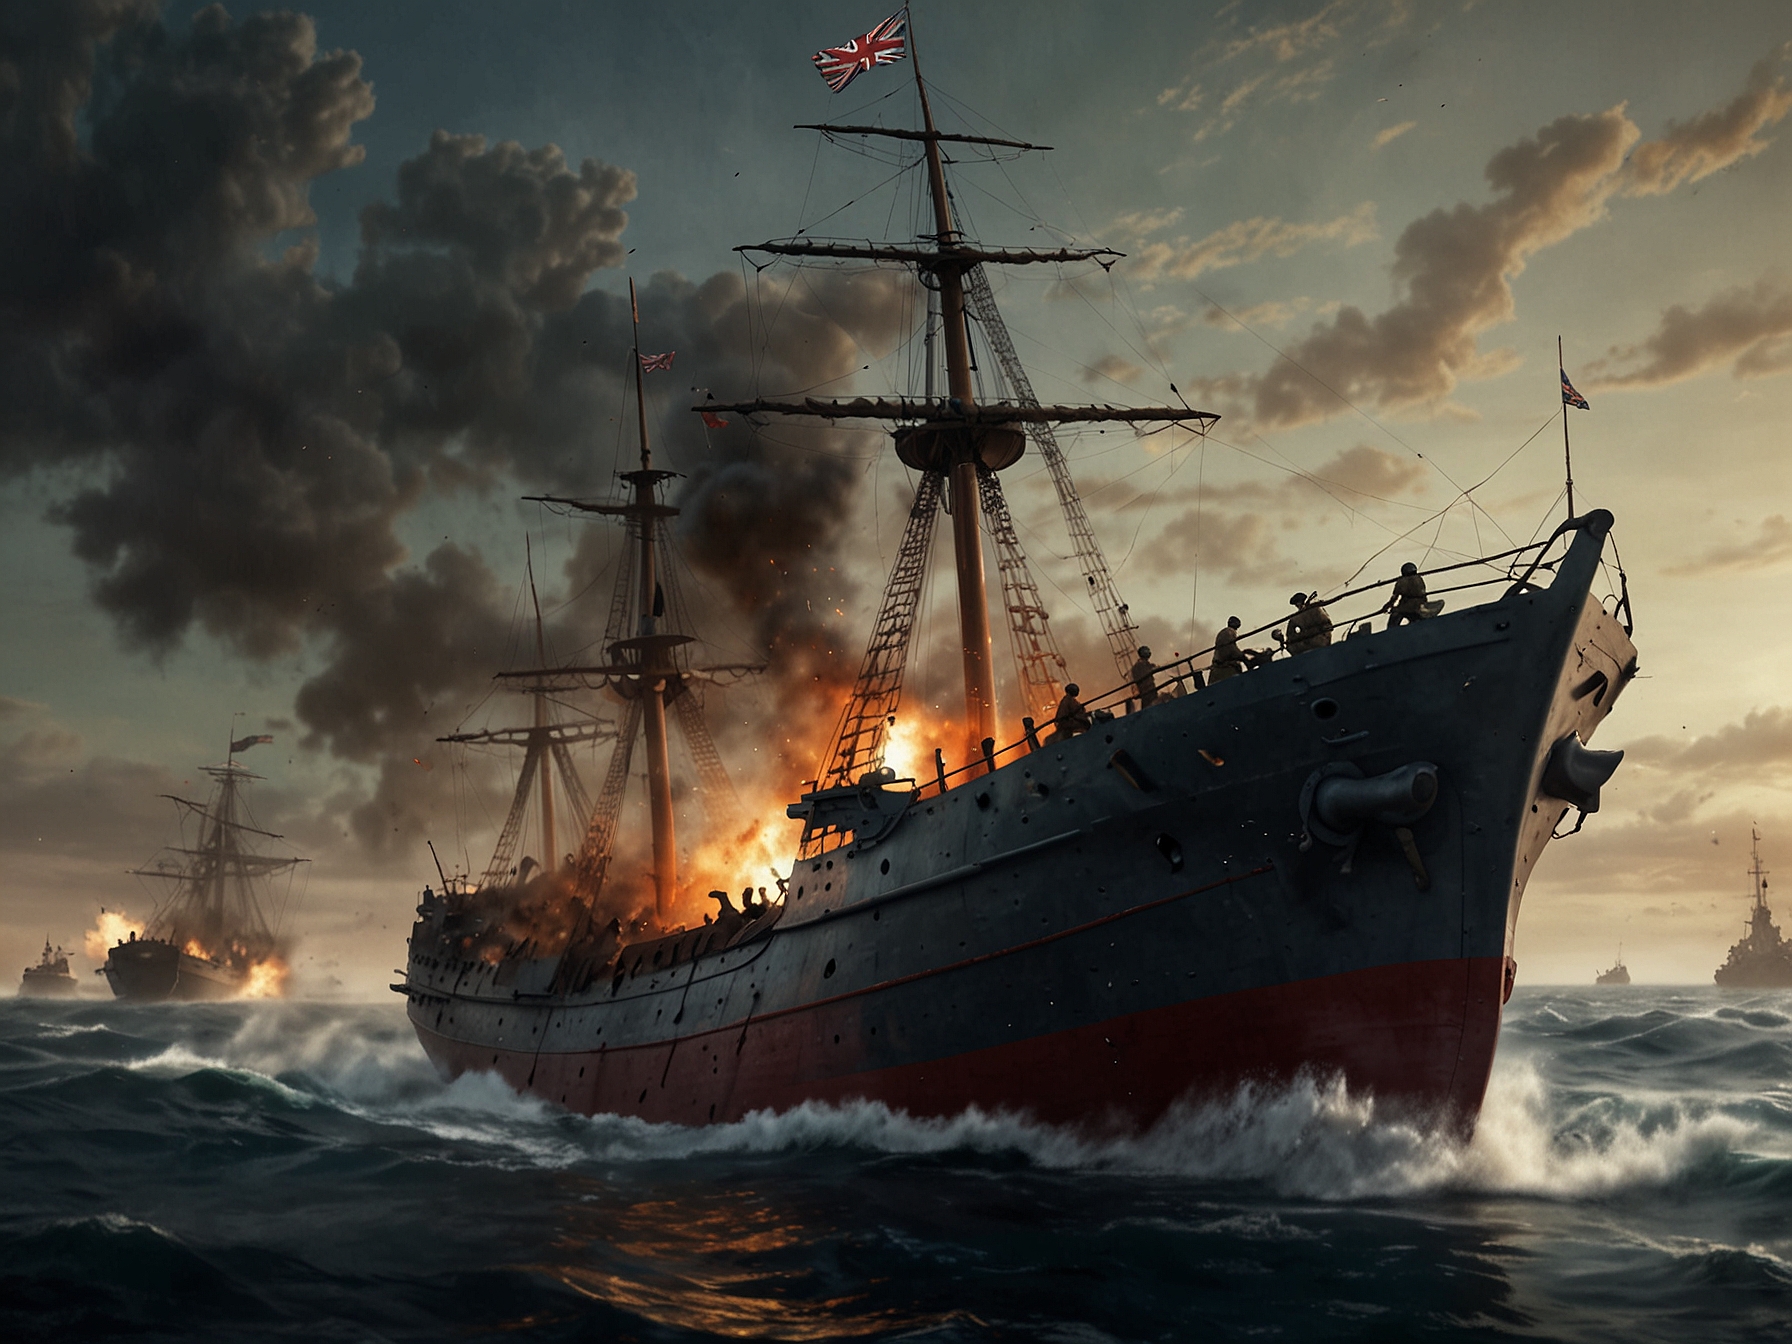 A historical reenactment scene from 'The Last Voyage,' showing a British warship under attack during World War II, setting the stage for the soldiers' subsequent rescue by Chinese villagers.